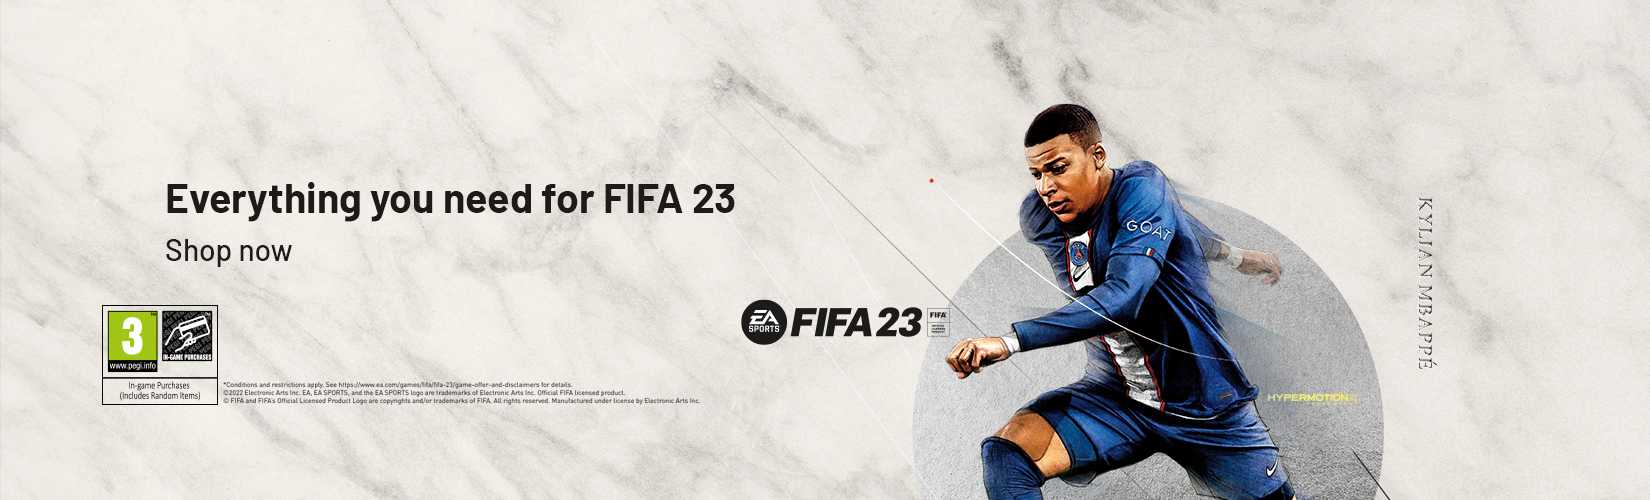 Buy FIFA 23 Xbox One Game